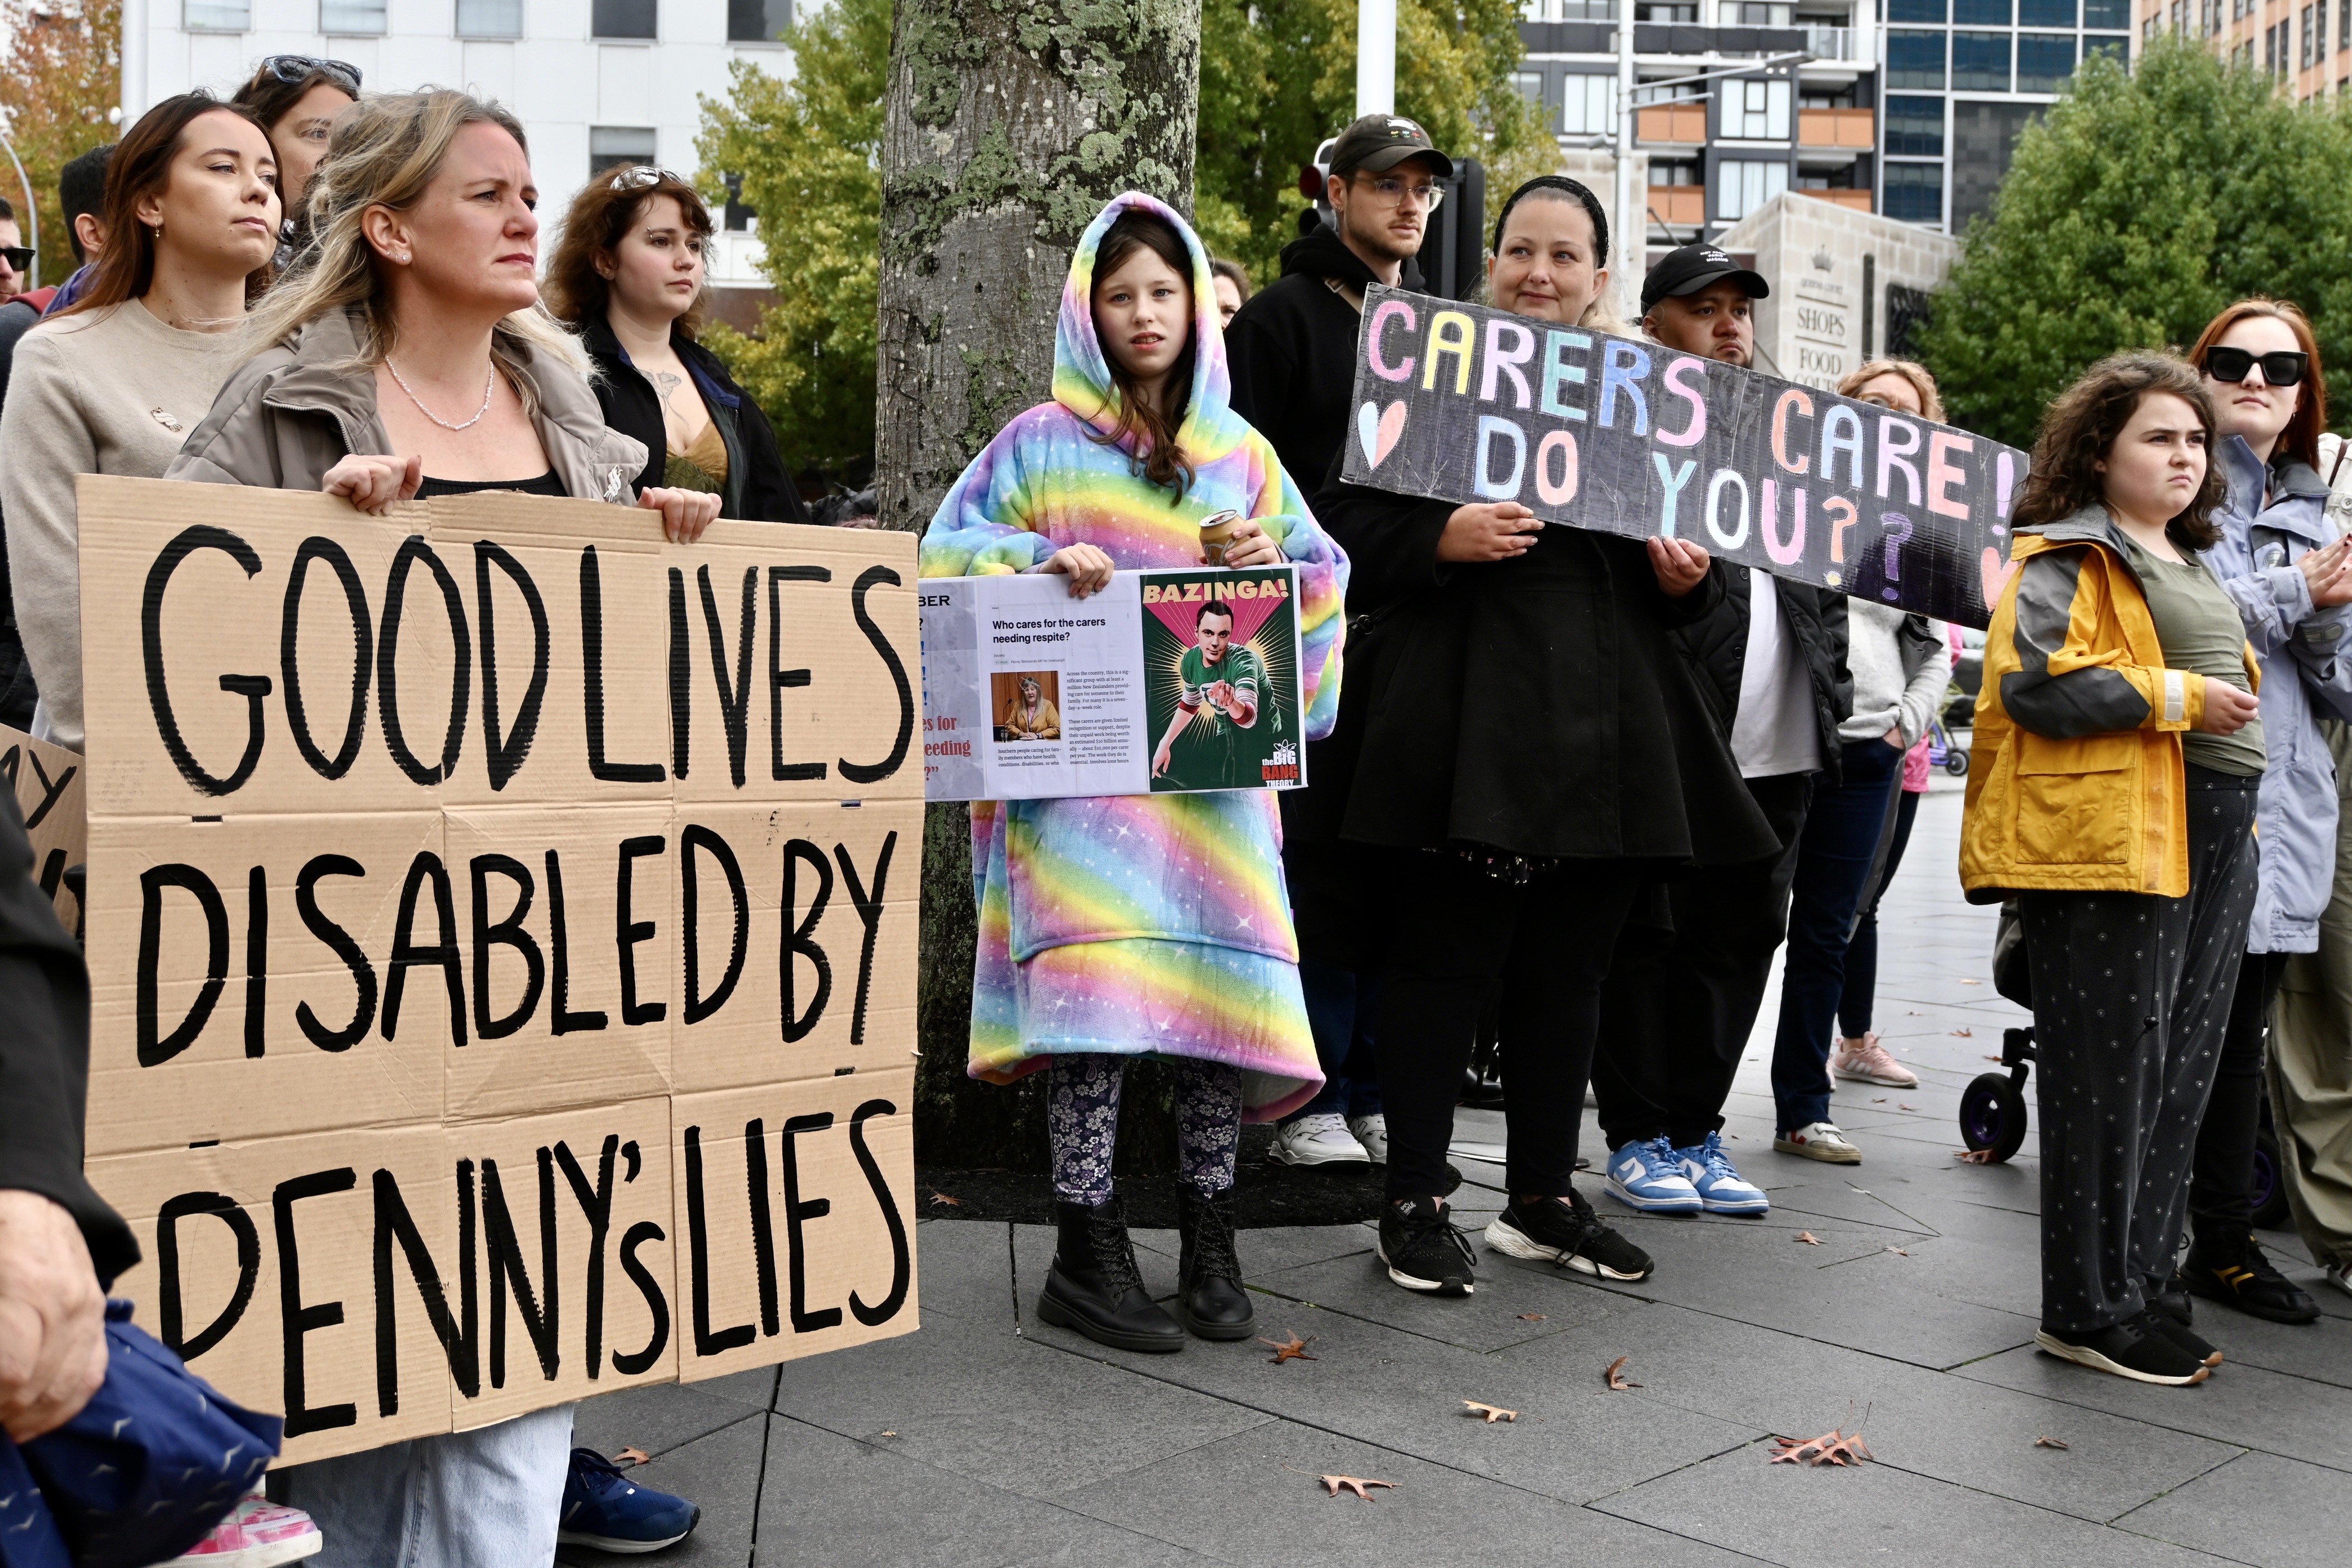 A group of people protest. A cardboard sign reads: Good lives disabled by Penny's lies. Another sign reads: Carers care, do you?